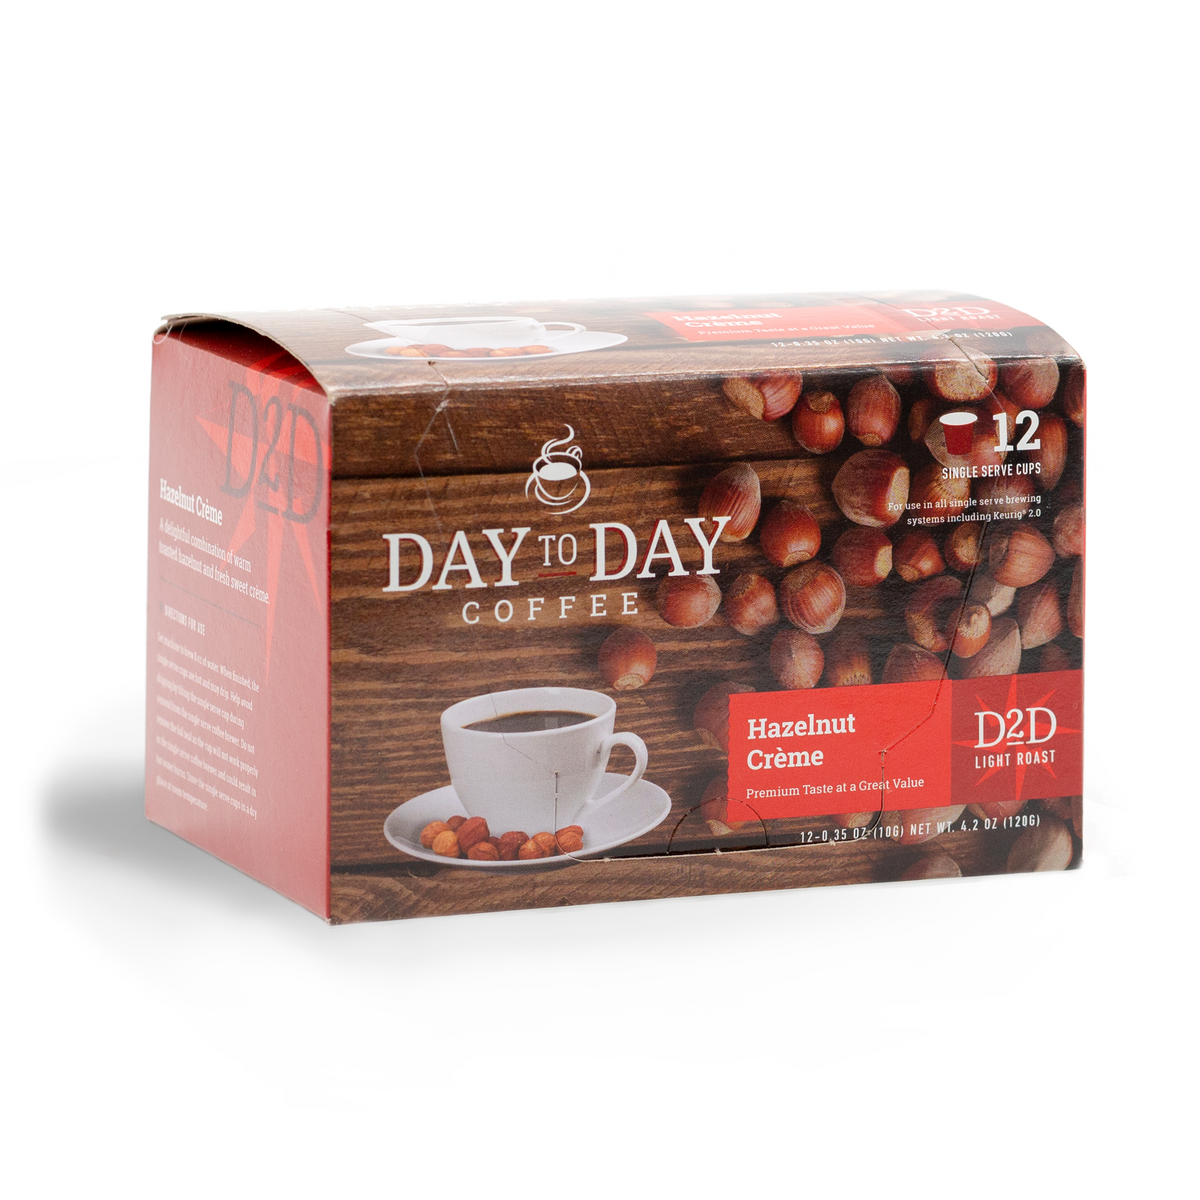 Day to day coffee 12 count hazelnut creme  coffee pods for single serve coffee brewer